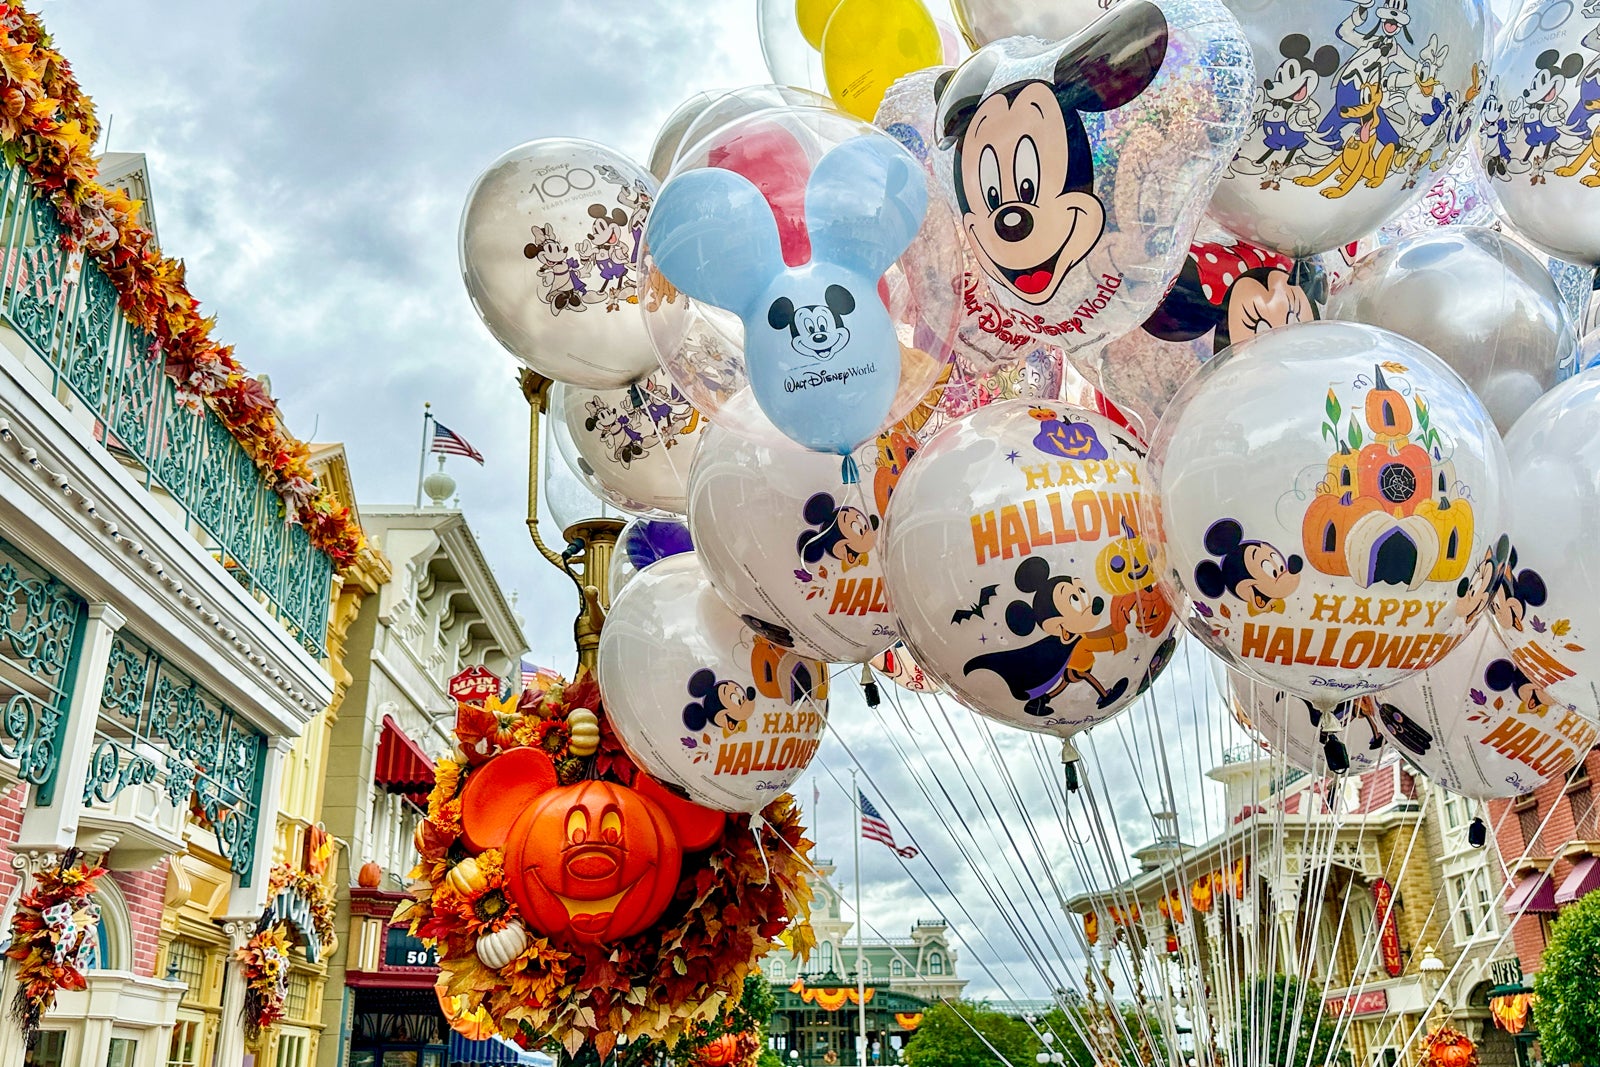 How to plan a trip to Disney World in 2024 - The Points Guy